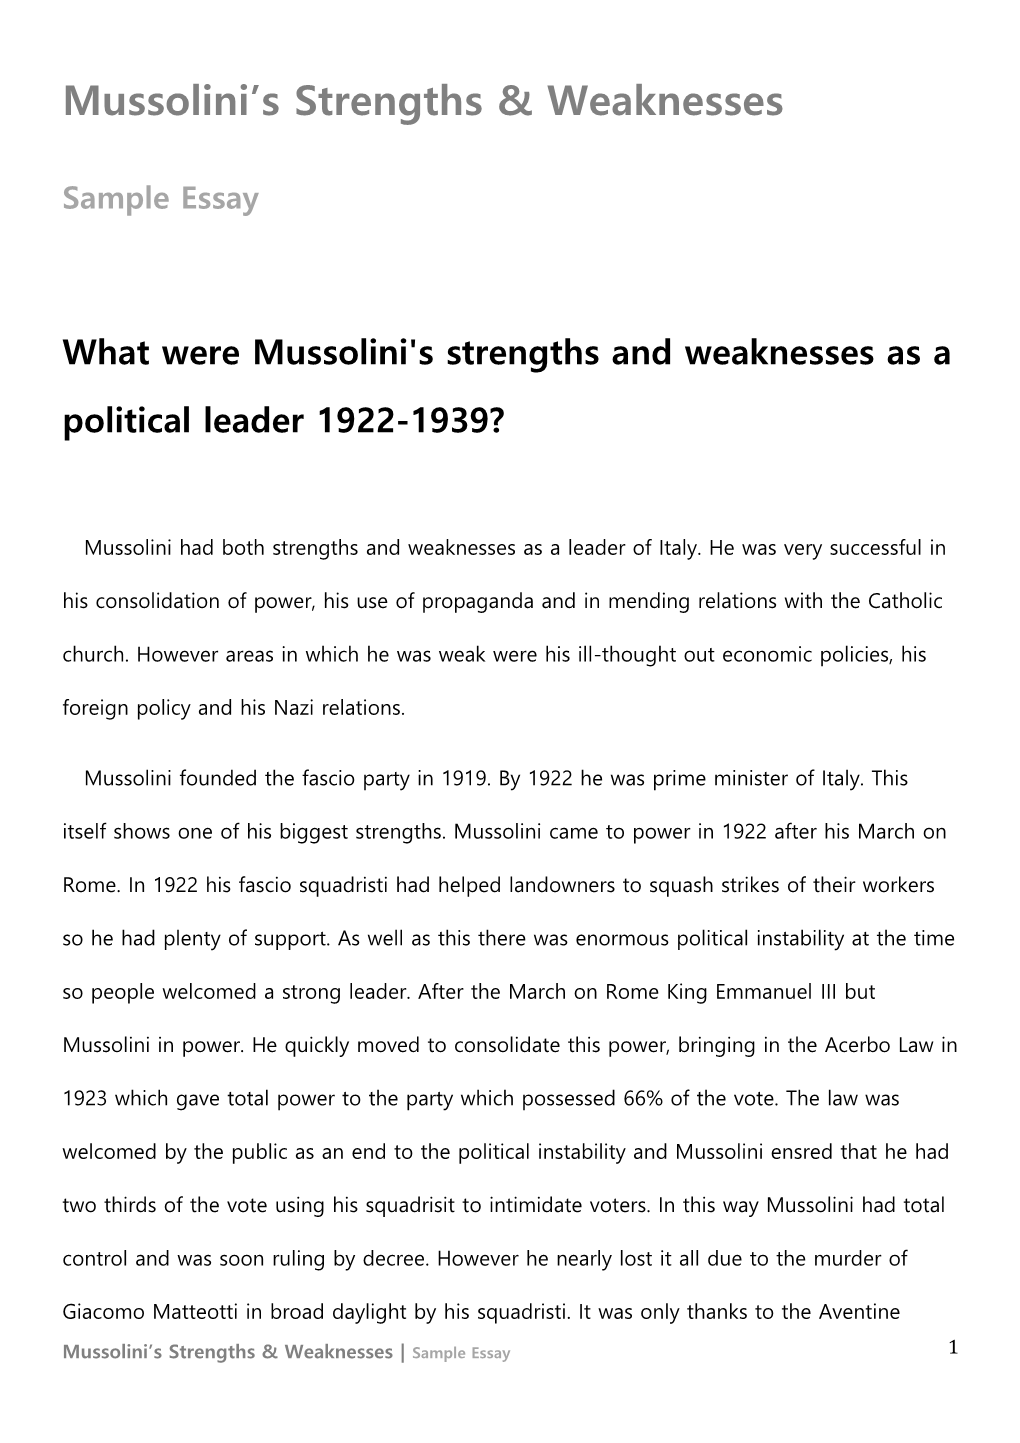 Mussolini's Strengths & Weaknesses